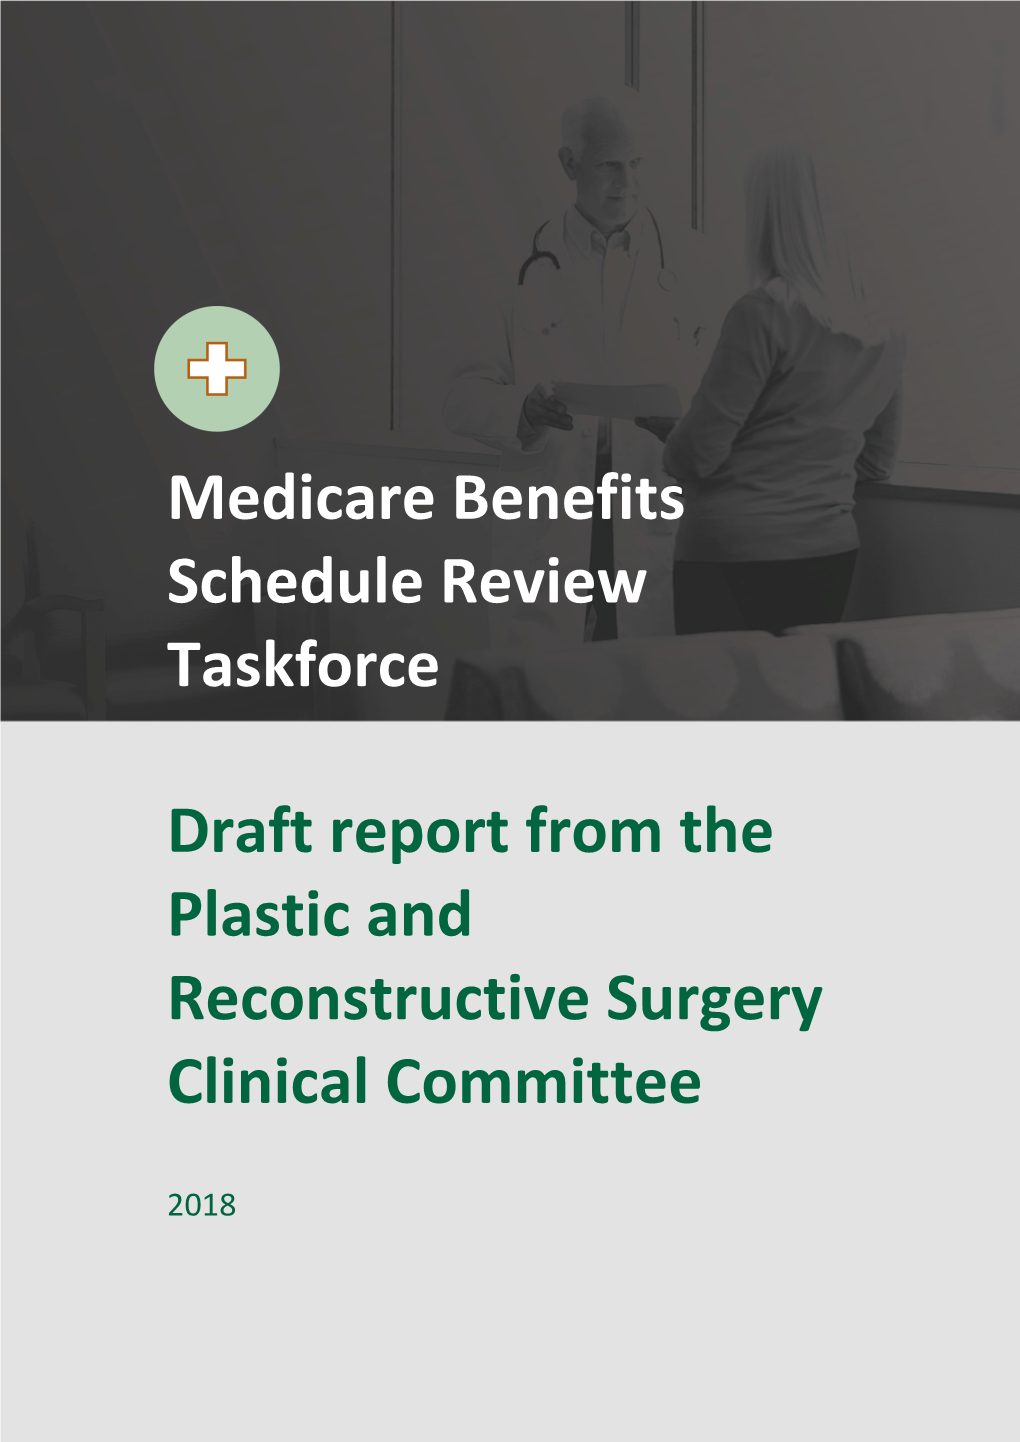 Draft Report from the Plastic and Reconstructive Surgery Clinical Committee